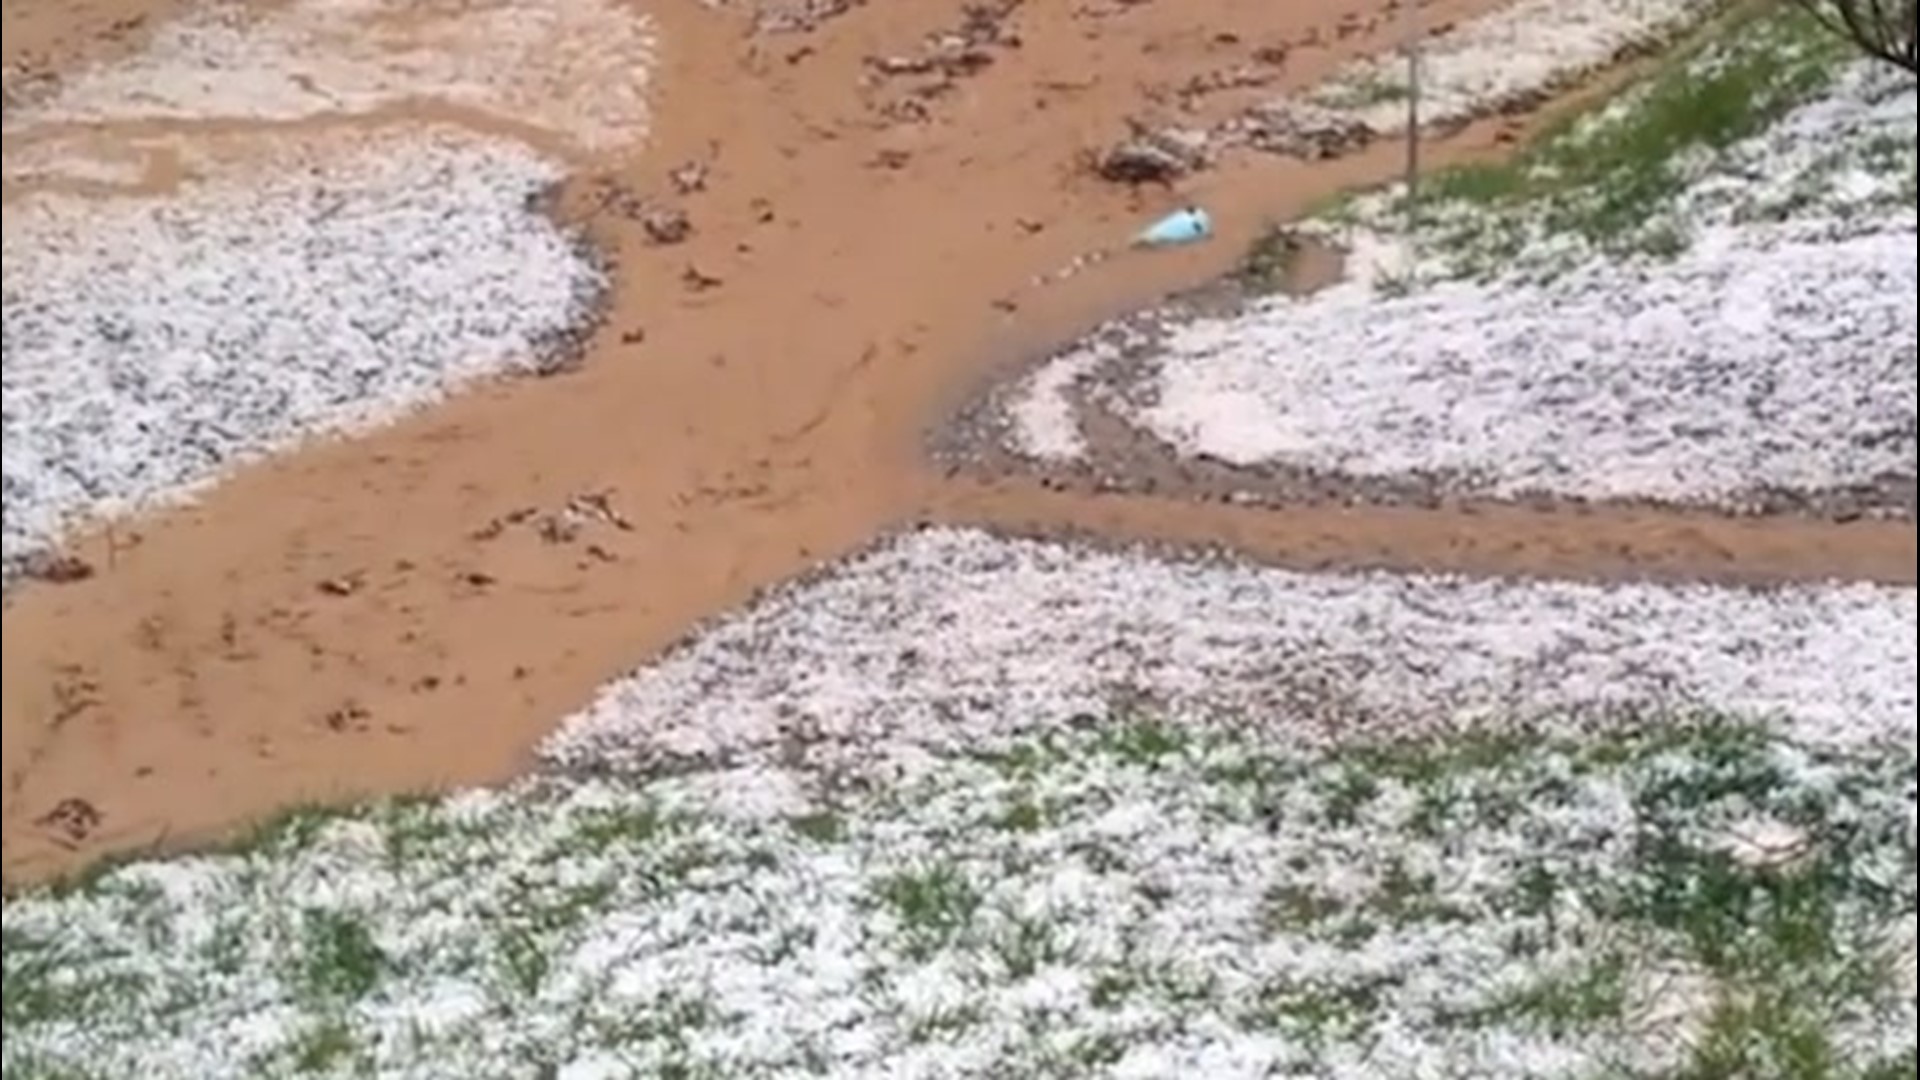 The ground turned white as hail bashed Weston, West Virginia, on April 7.